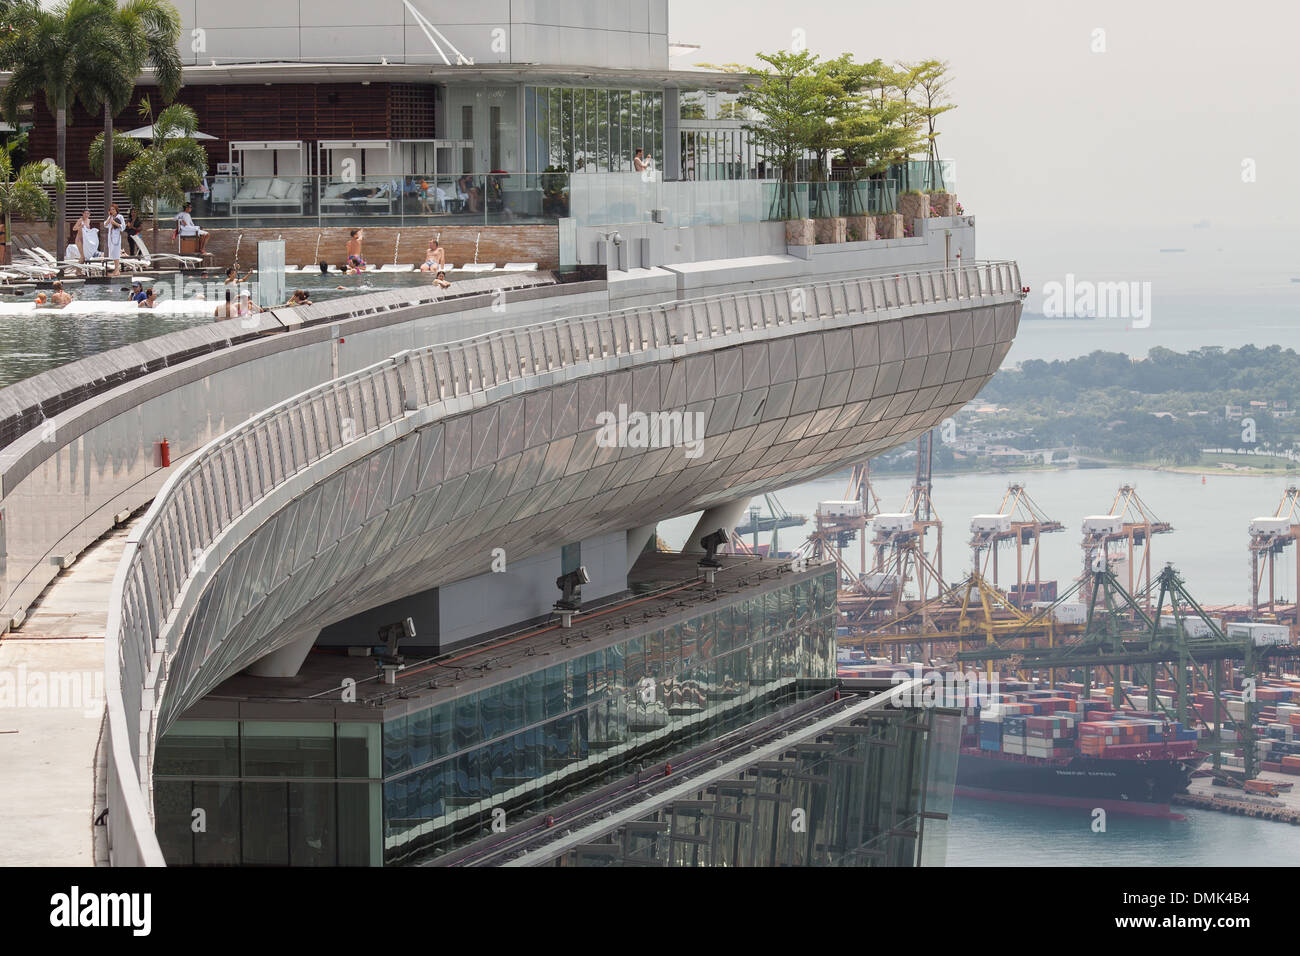 THE TERRACE OF THE HOTEL MARINA BAY SANDS WITH, IN THE BACKGROUND, SHIPPING CONTAINERS AND THE COMMERCIAL PORT OF SINGAPORE, MARINA BAY, SINGAPORE Stock Photo